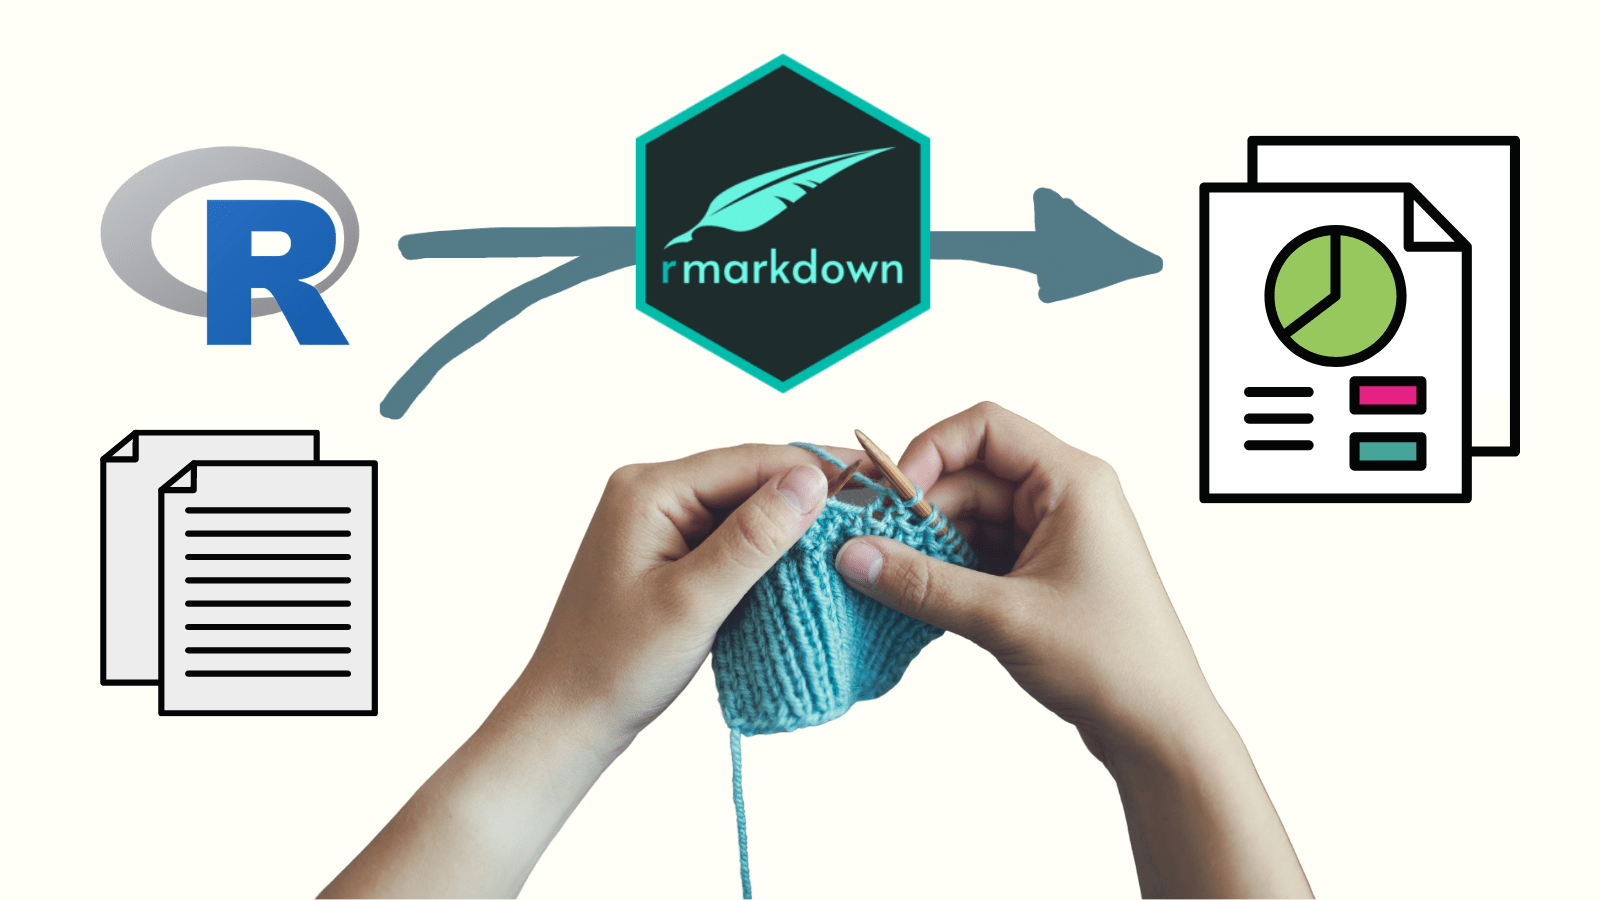 Image saying 'How to use R Markdown Part 1', with an arrow pointing from the R Markdown logo to the HTML logo. The background is a person knitting, and below the arrow it says 'KNIT!'